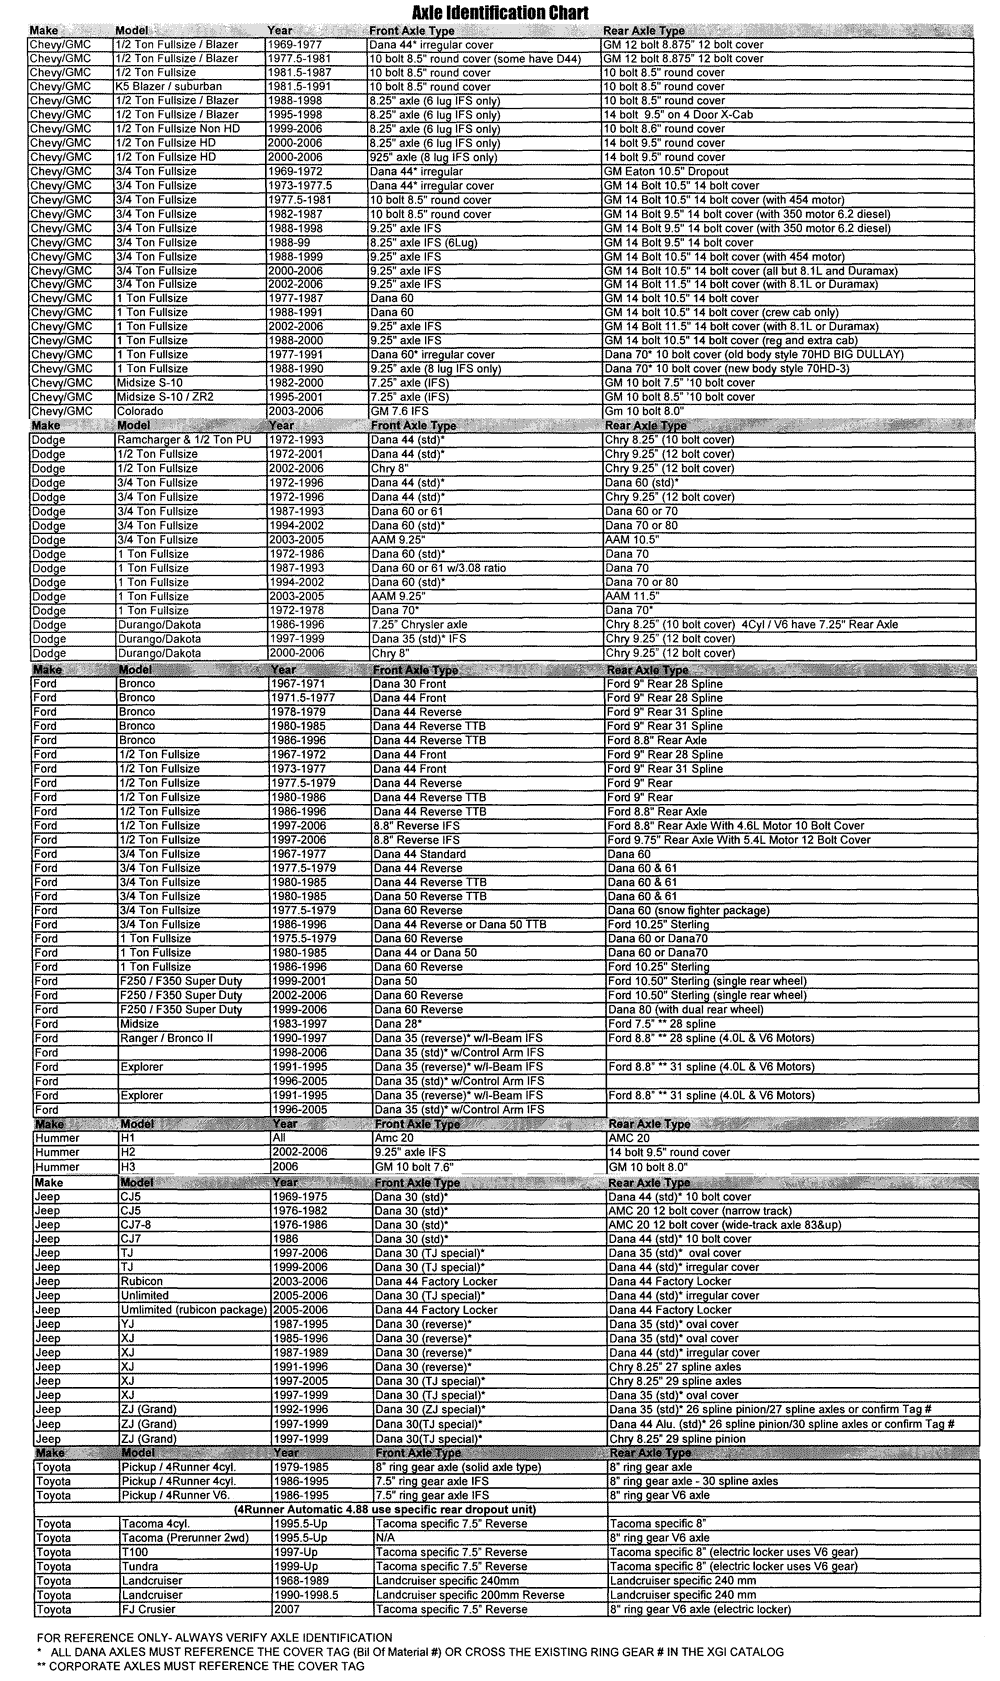 Ford axle identification chart